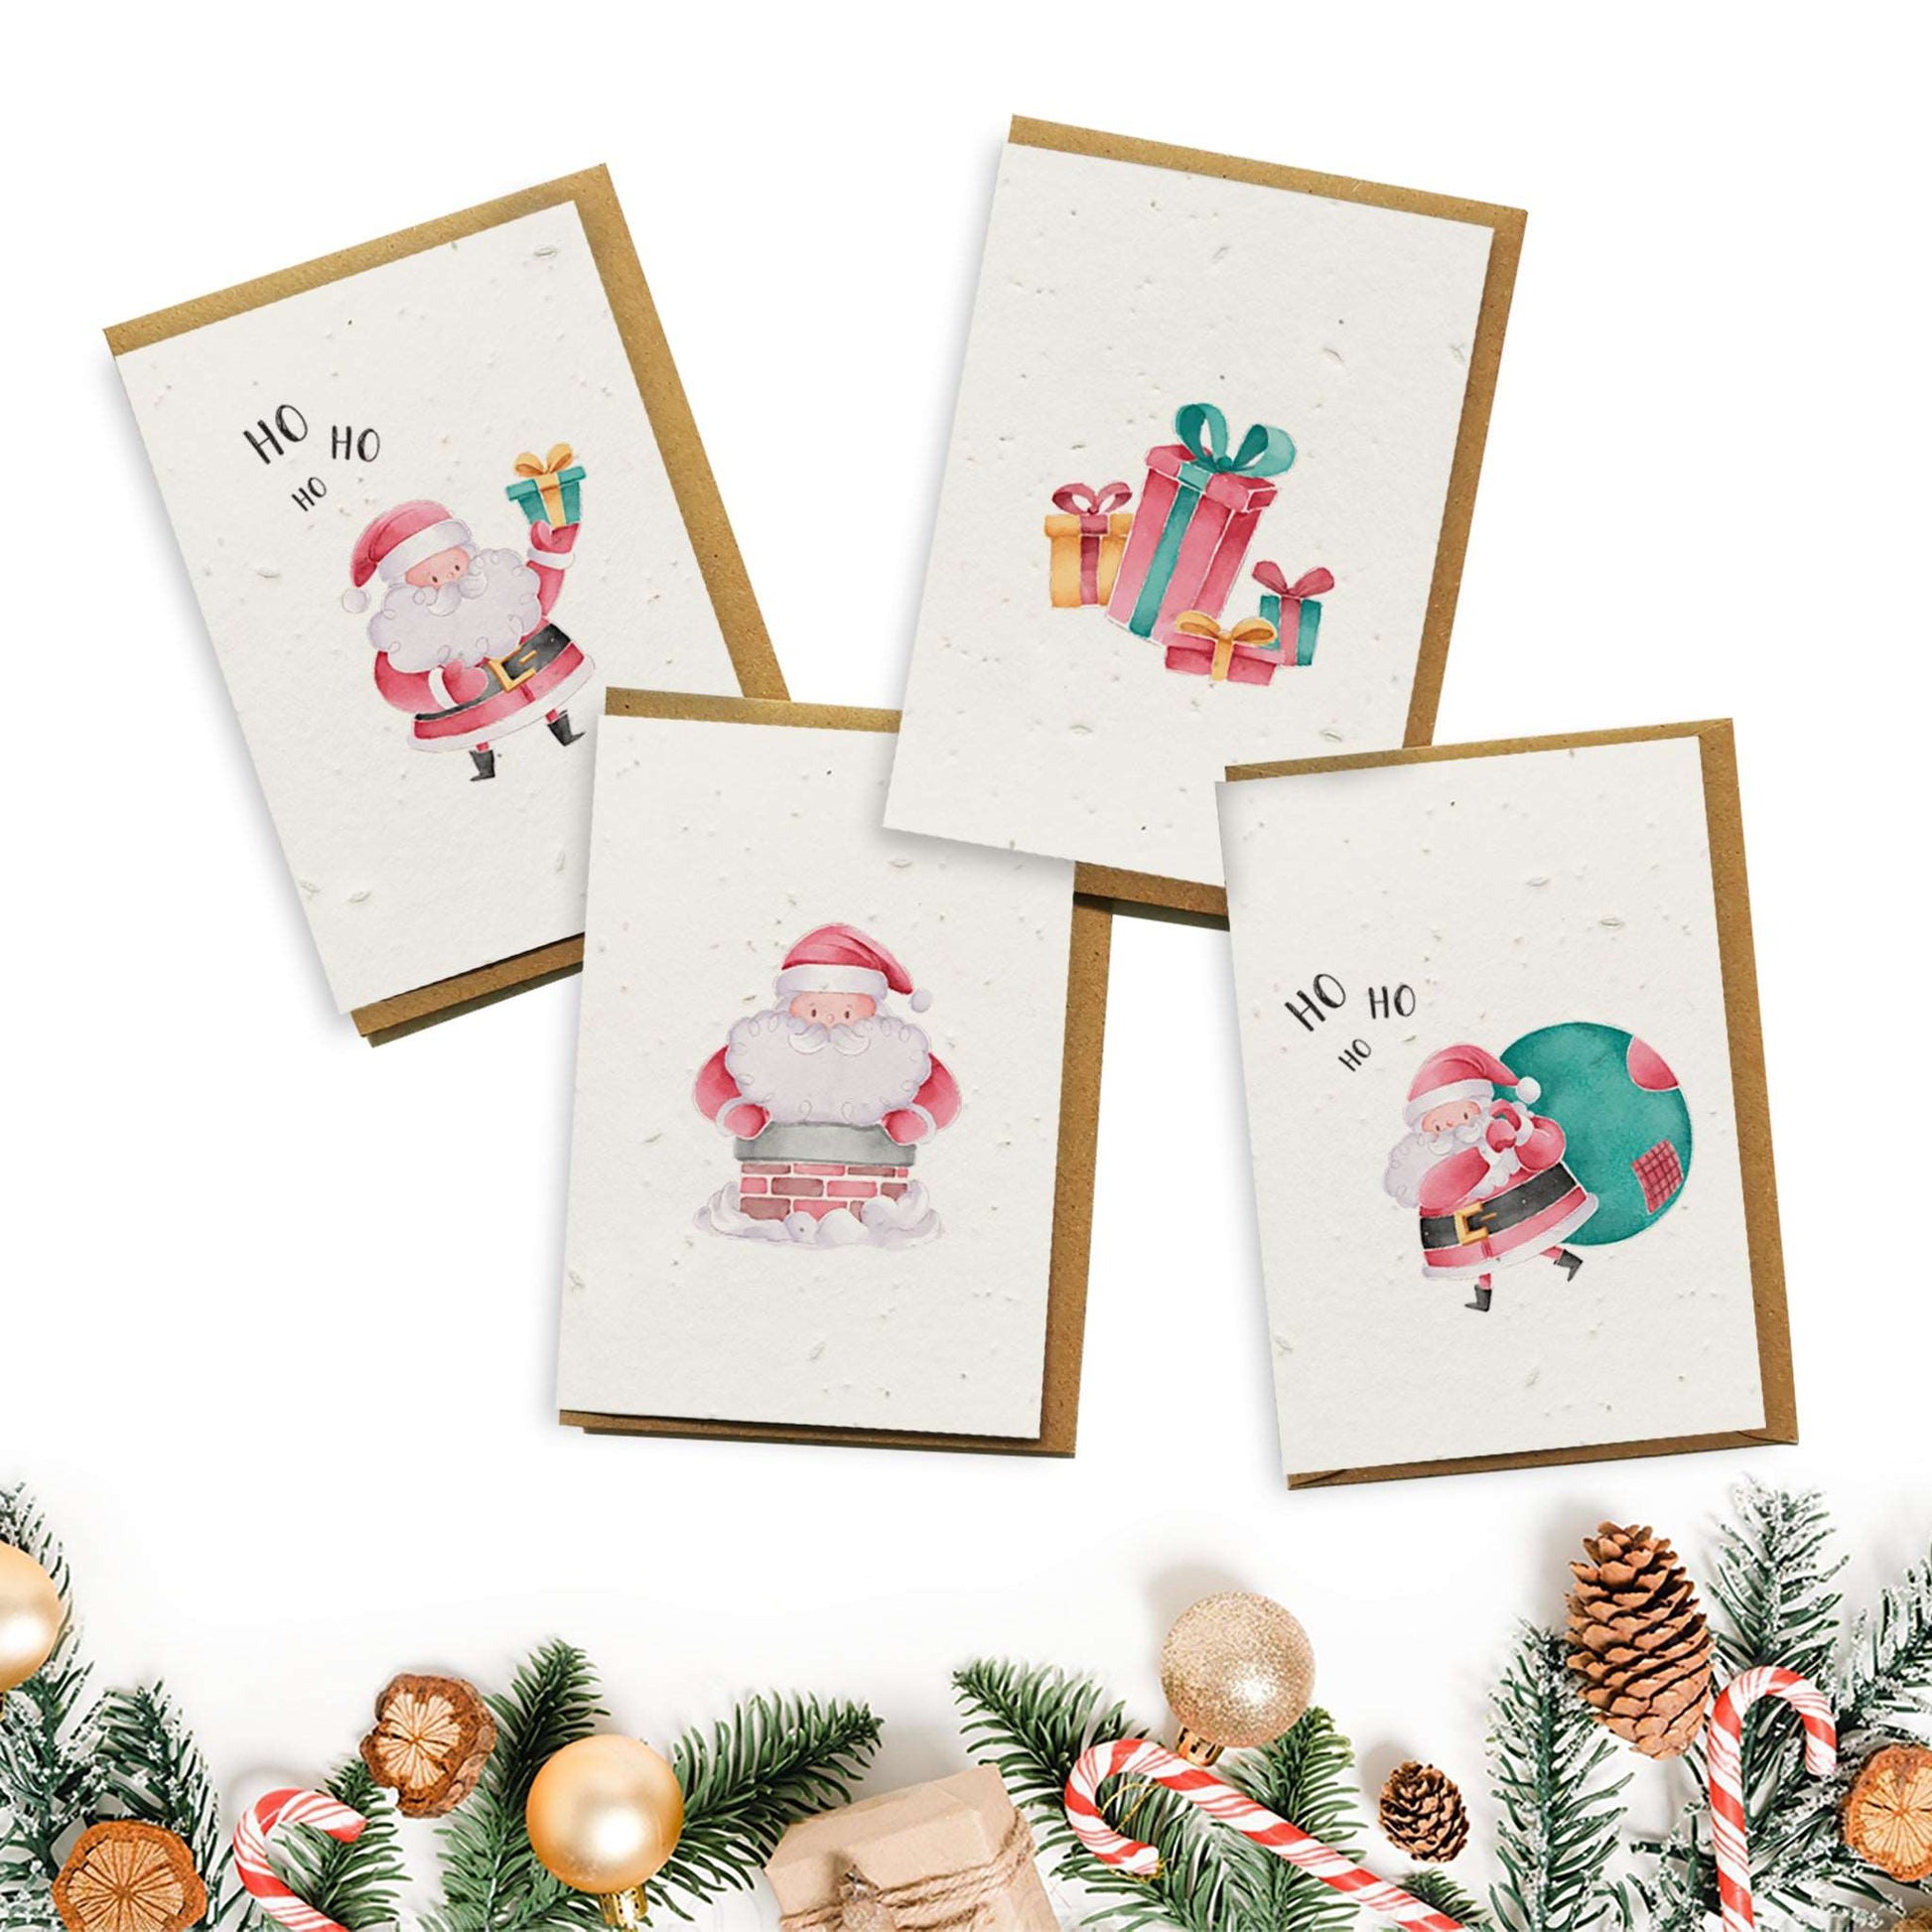 Plantable Seed Paper Christmas Cards 4-Pack - Ho Ho Ho Greeting Card Little Green Paper Shop